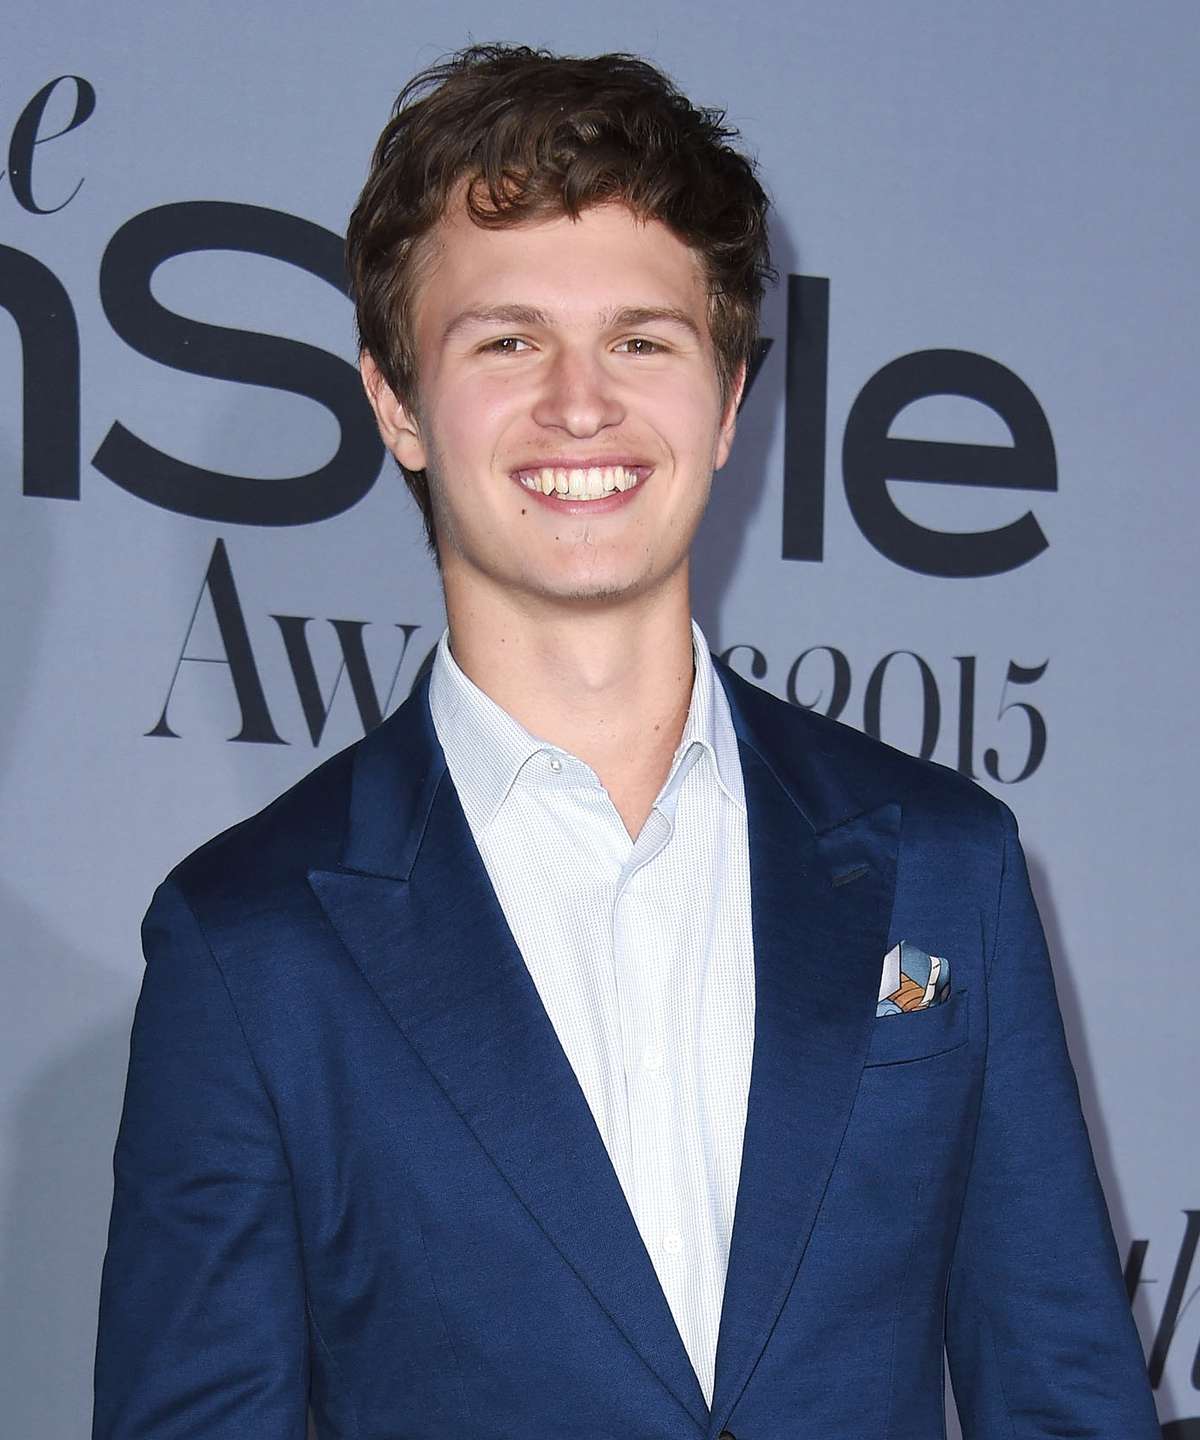 Ansel Elgort arrives at the InStyle Awards at Getty Center on October 26, 2015 in Los Angeles, California.